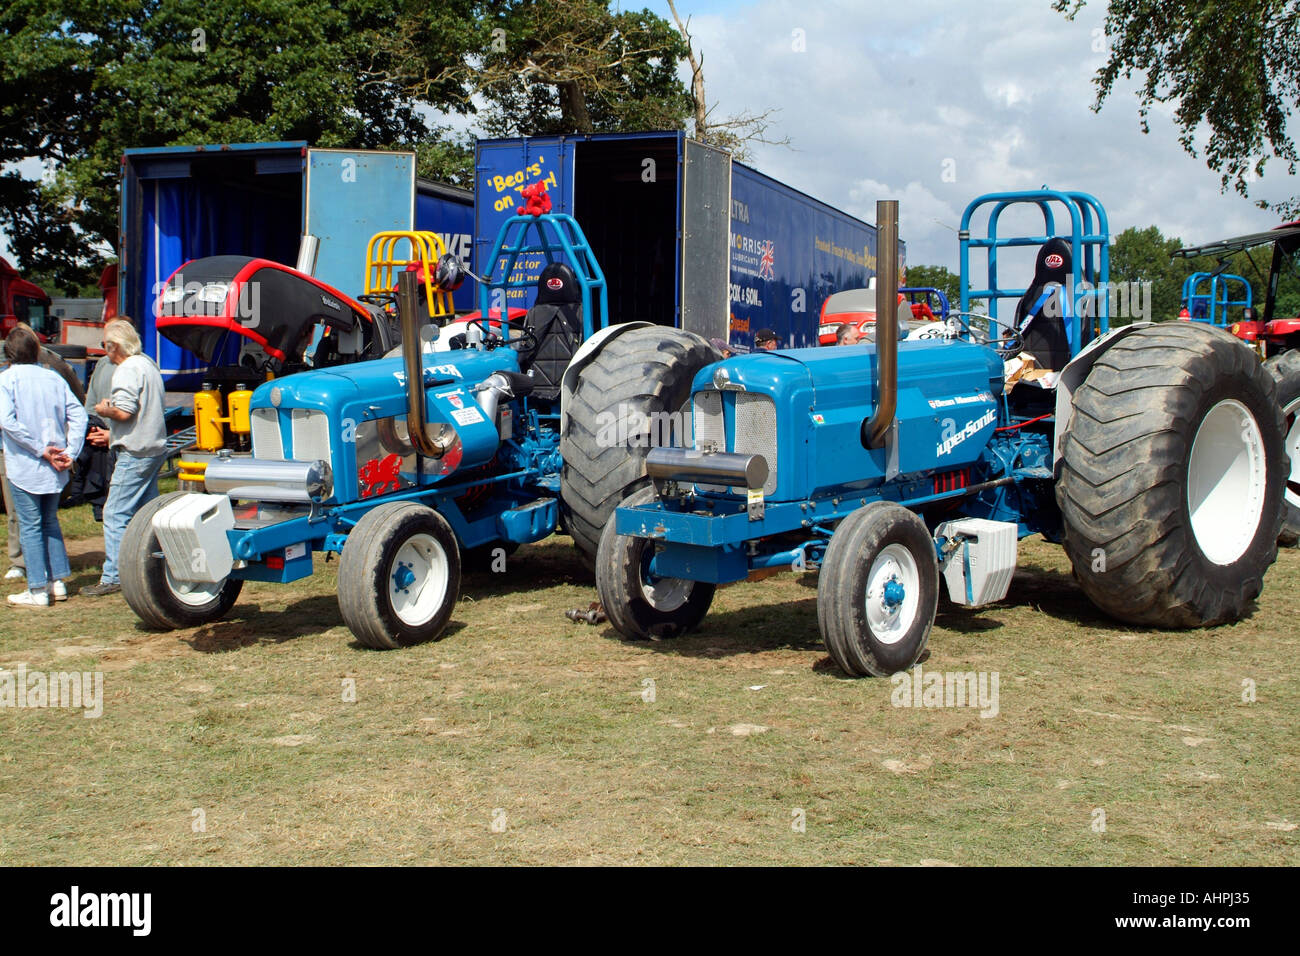 Originally just a farm tractor now a suped up racing tractor Stock Photo